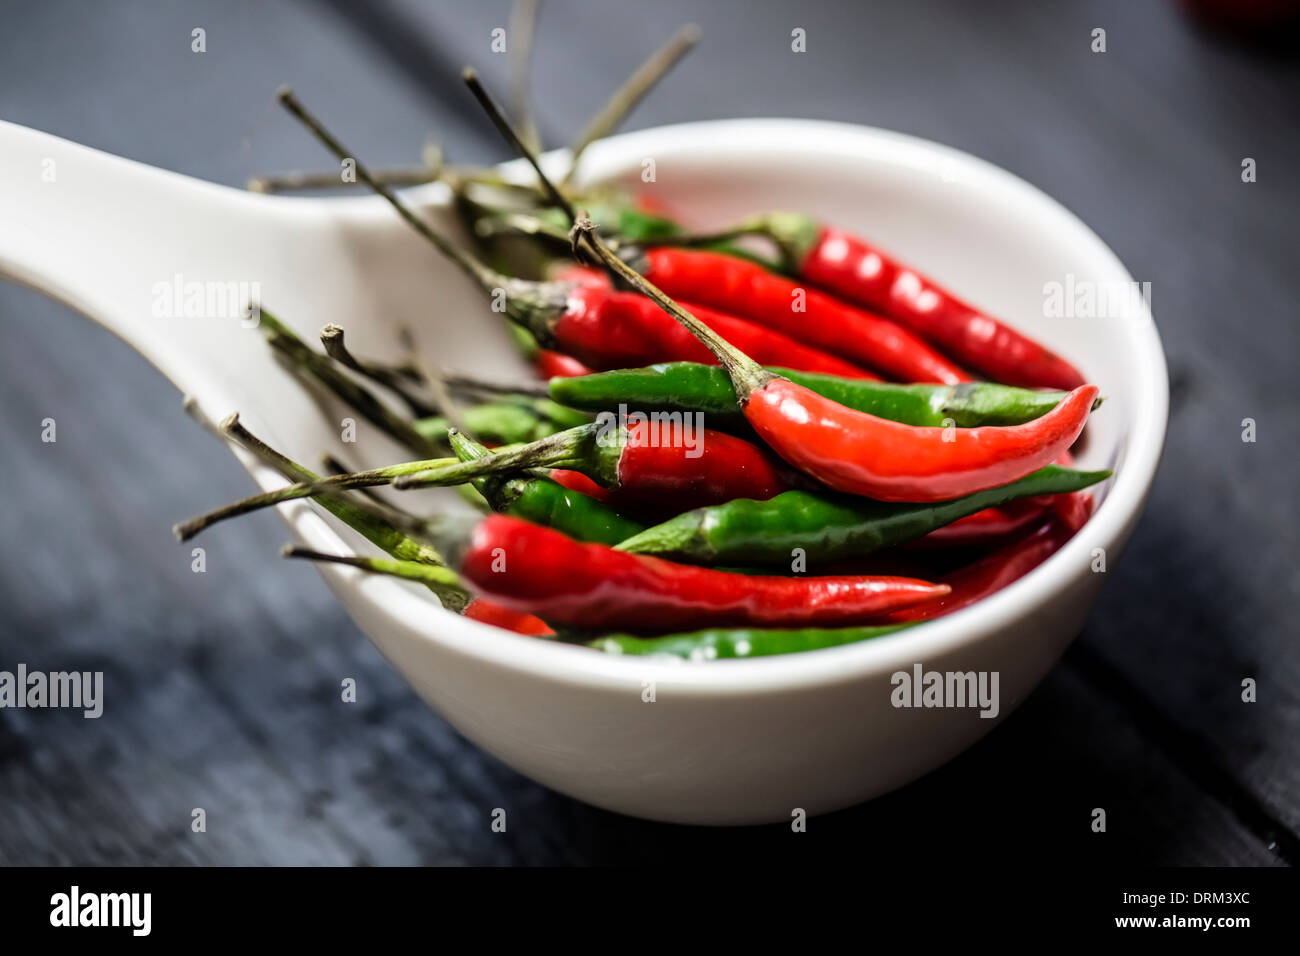 Red and green chilli peppers in a white bowl on wooden table Stock Photo